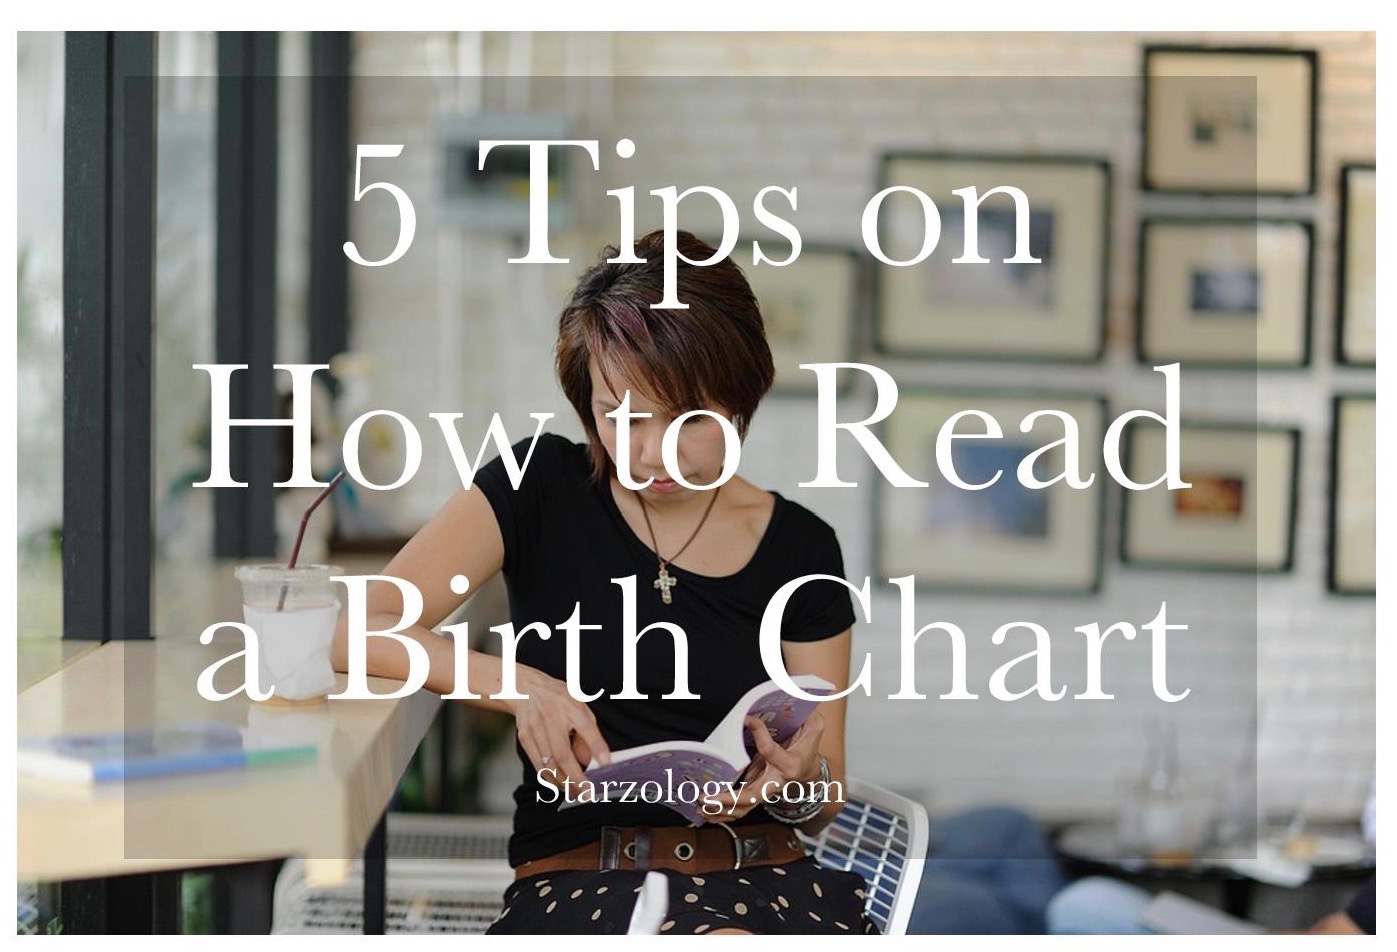 5 Tips on How to Read a Birth Chart